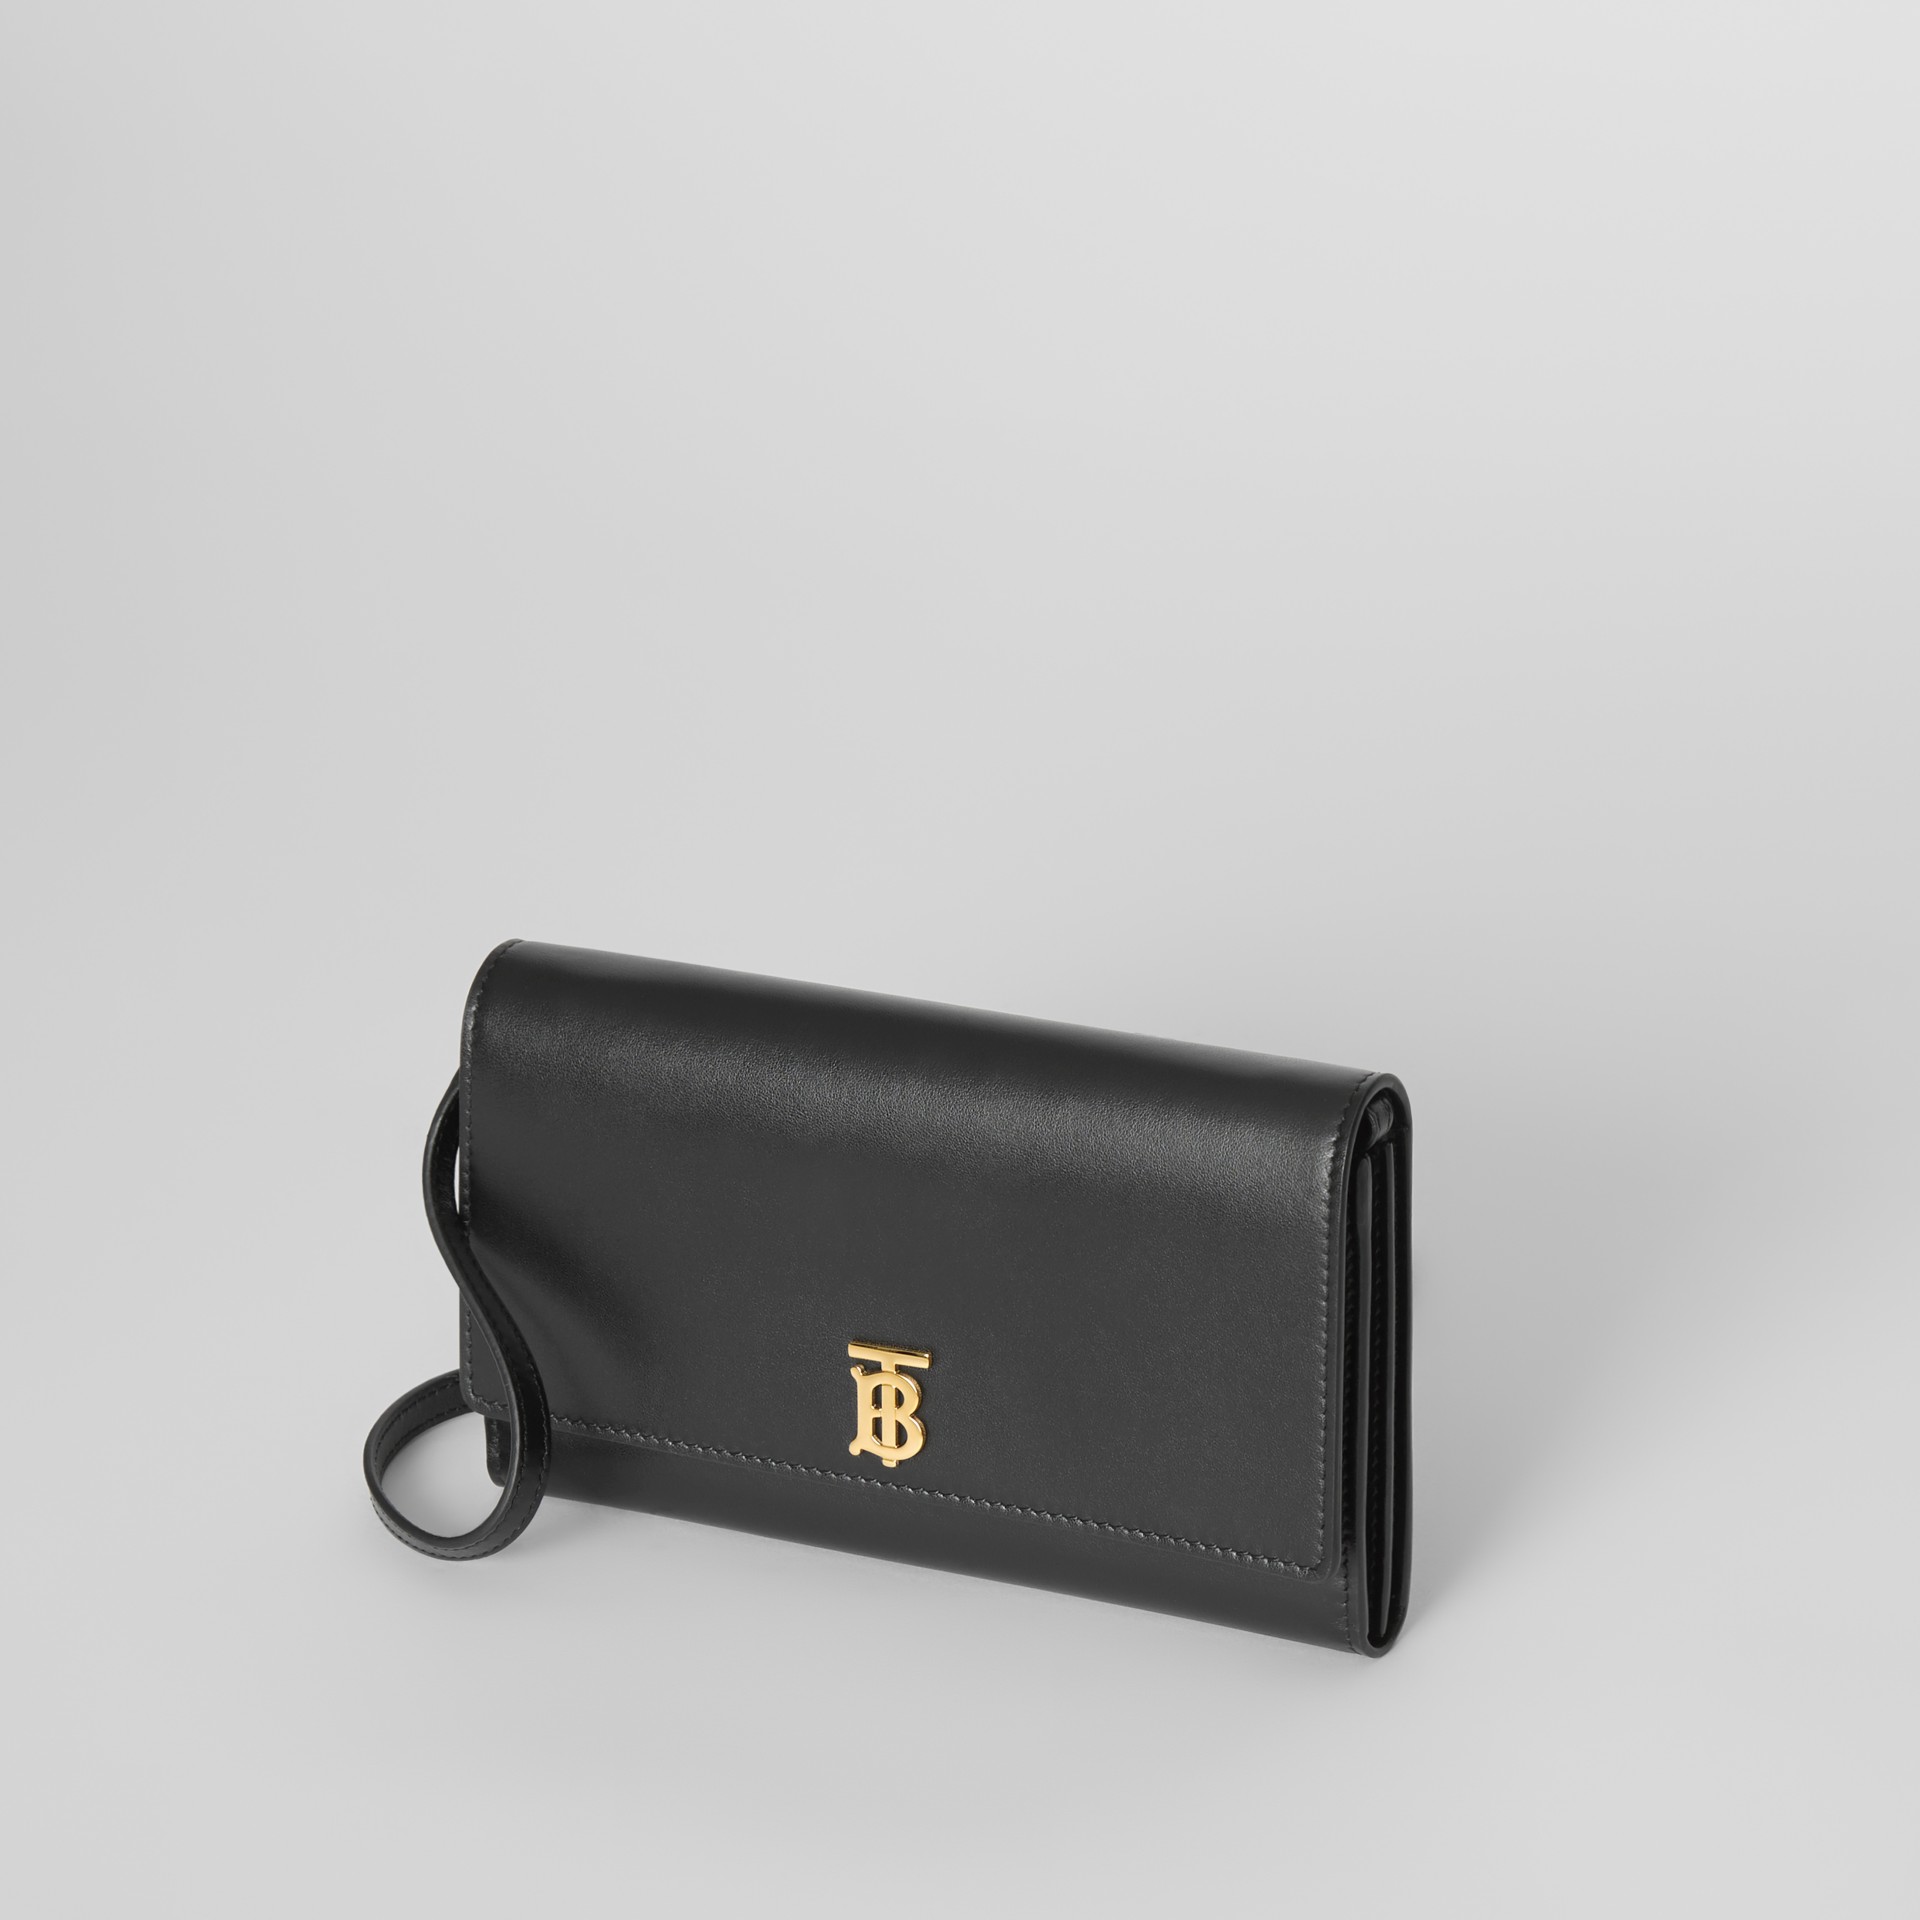 Monogram Motif Leather Wallet with Detachable Strap in Black - Women | Burberry United States